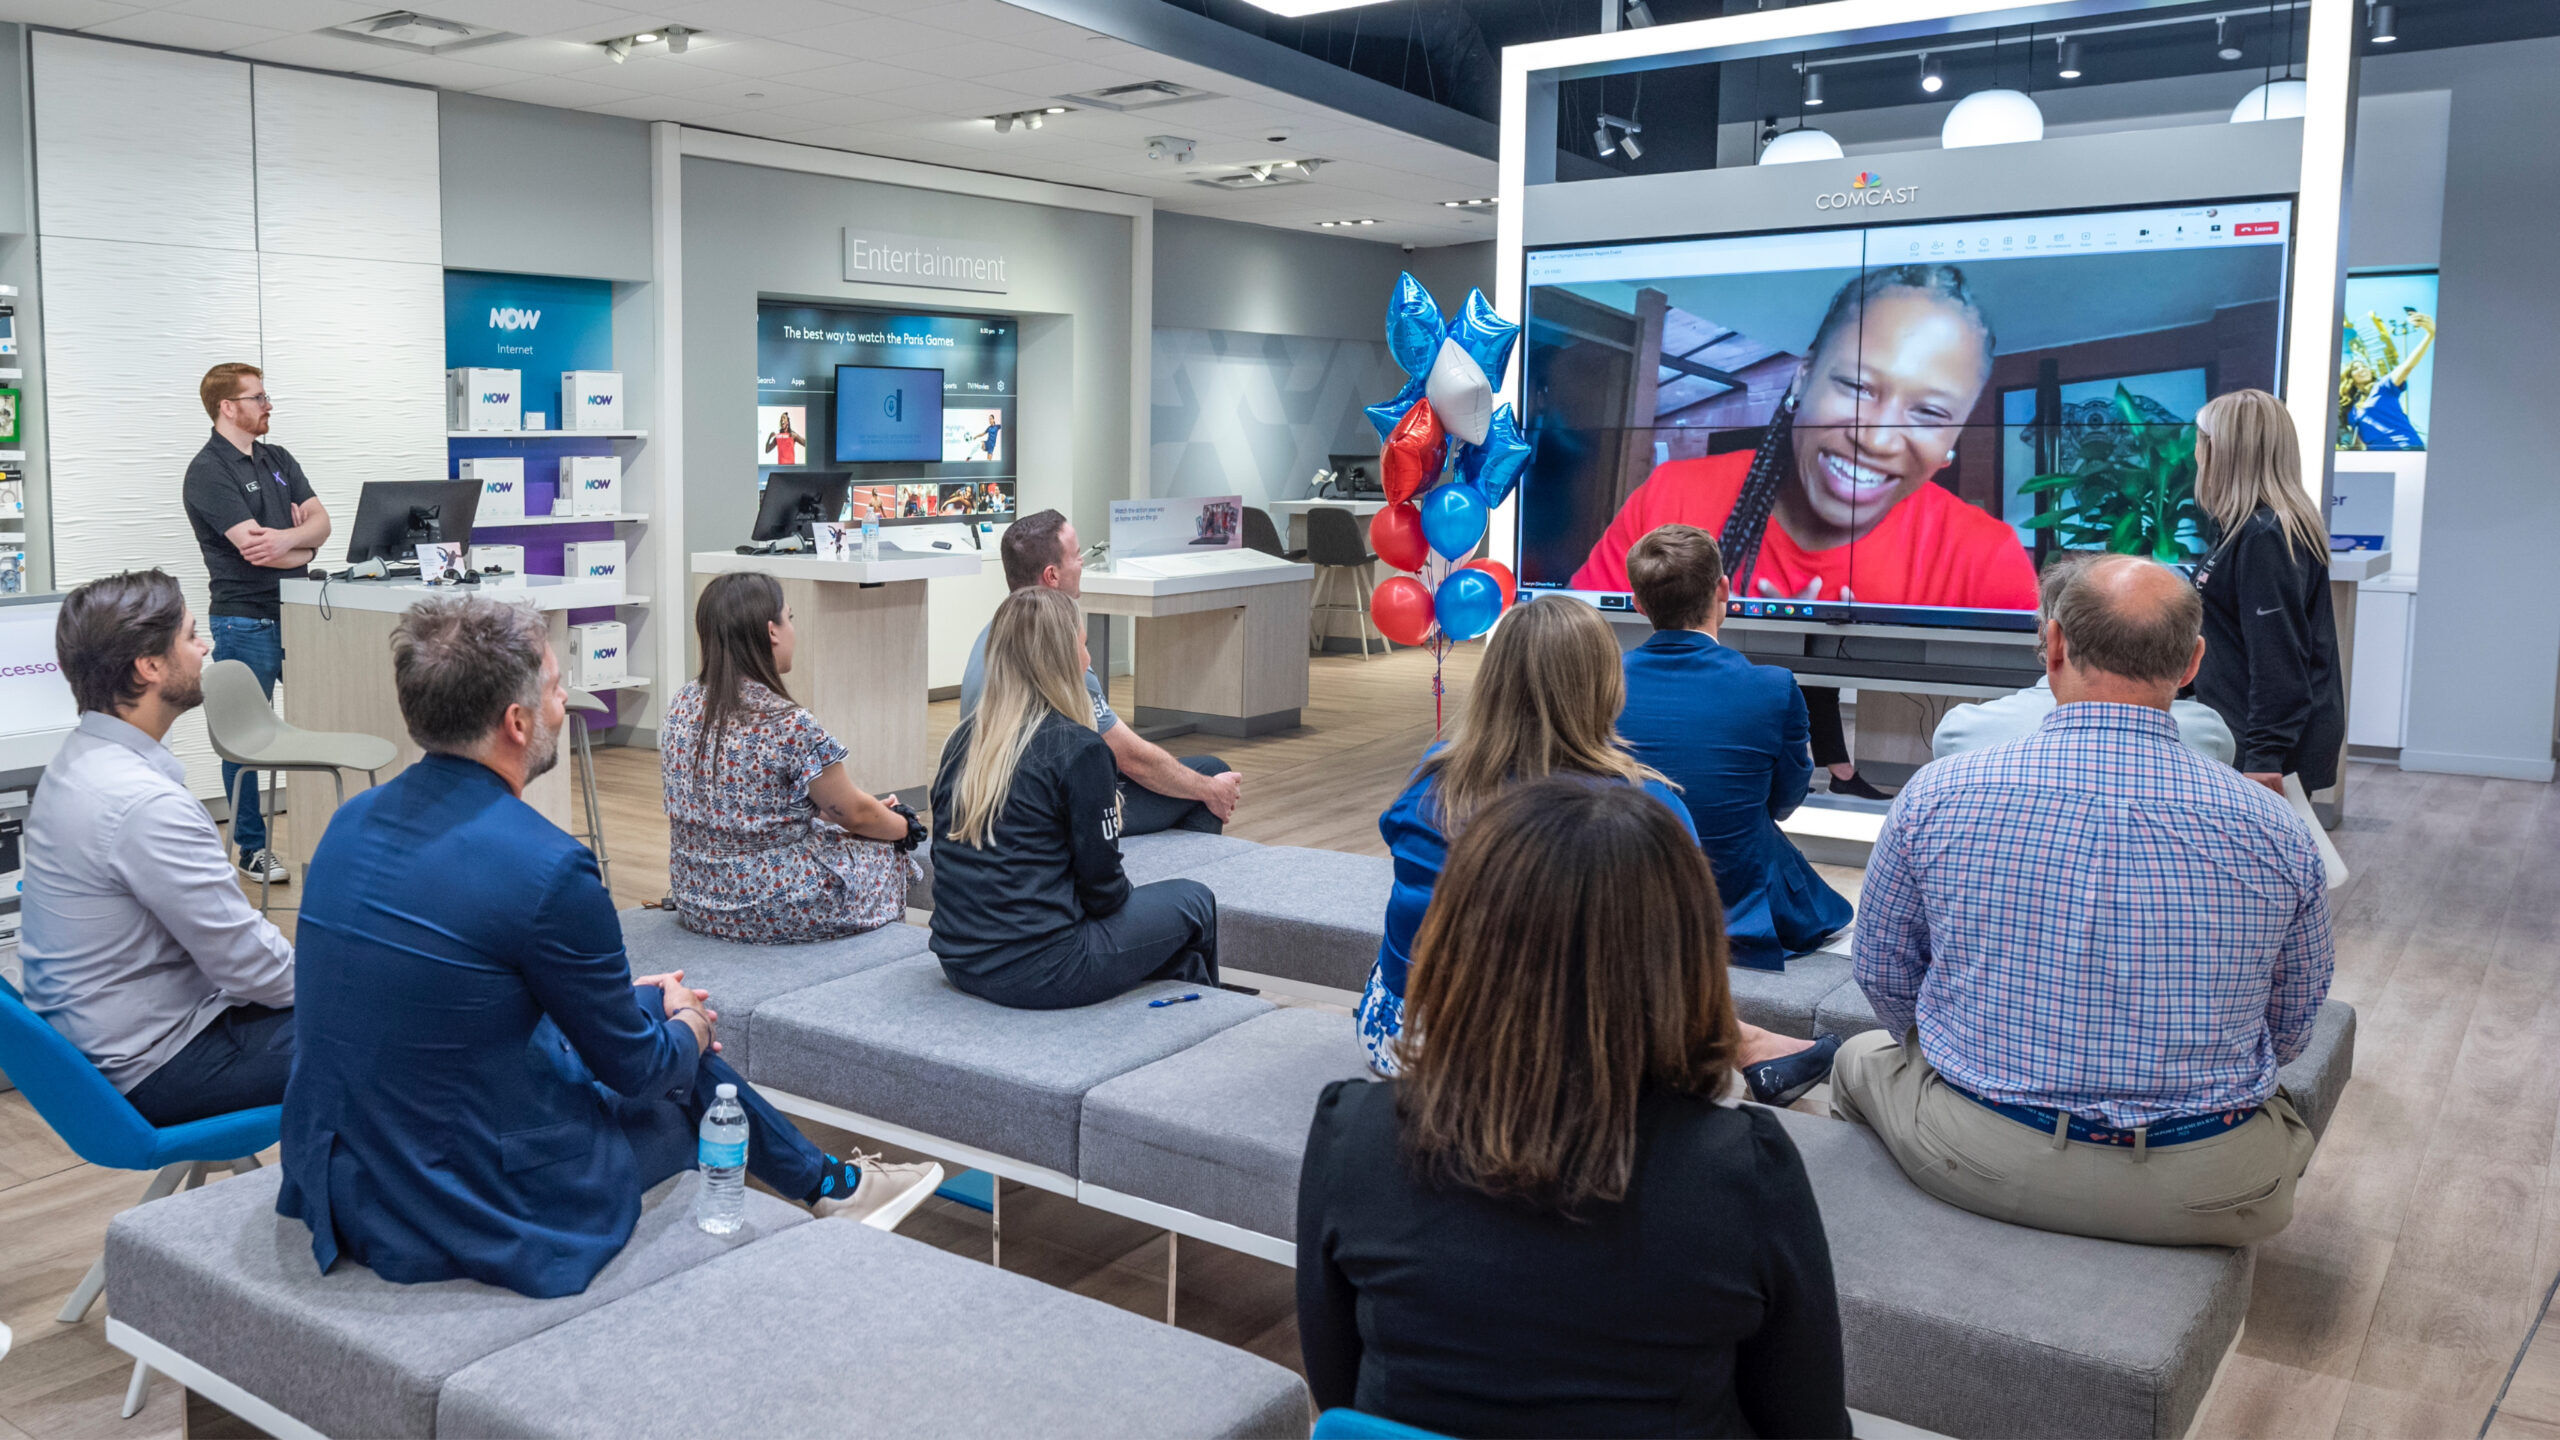 Comcast Celebrates the Ultimate Viewing Experience for The Olympic Games with Pittsburgh-Area U.S. Olympic Gold Medalist